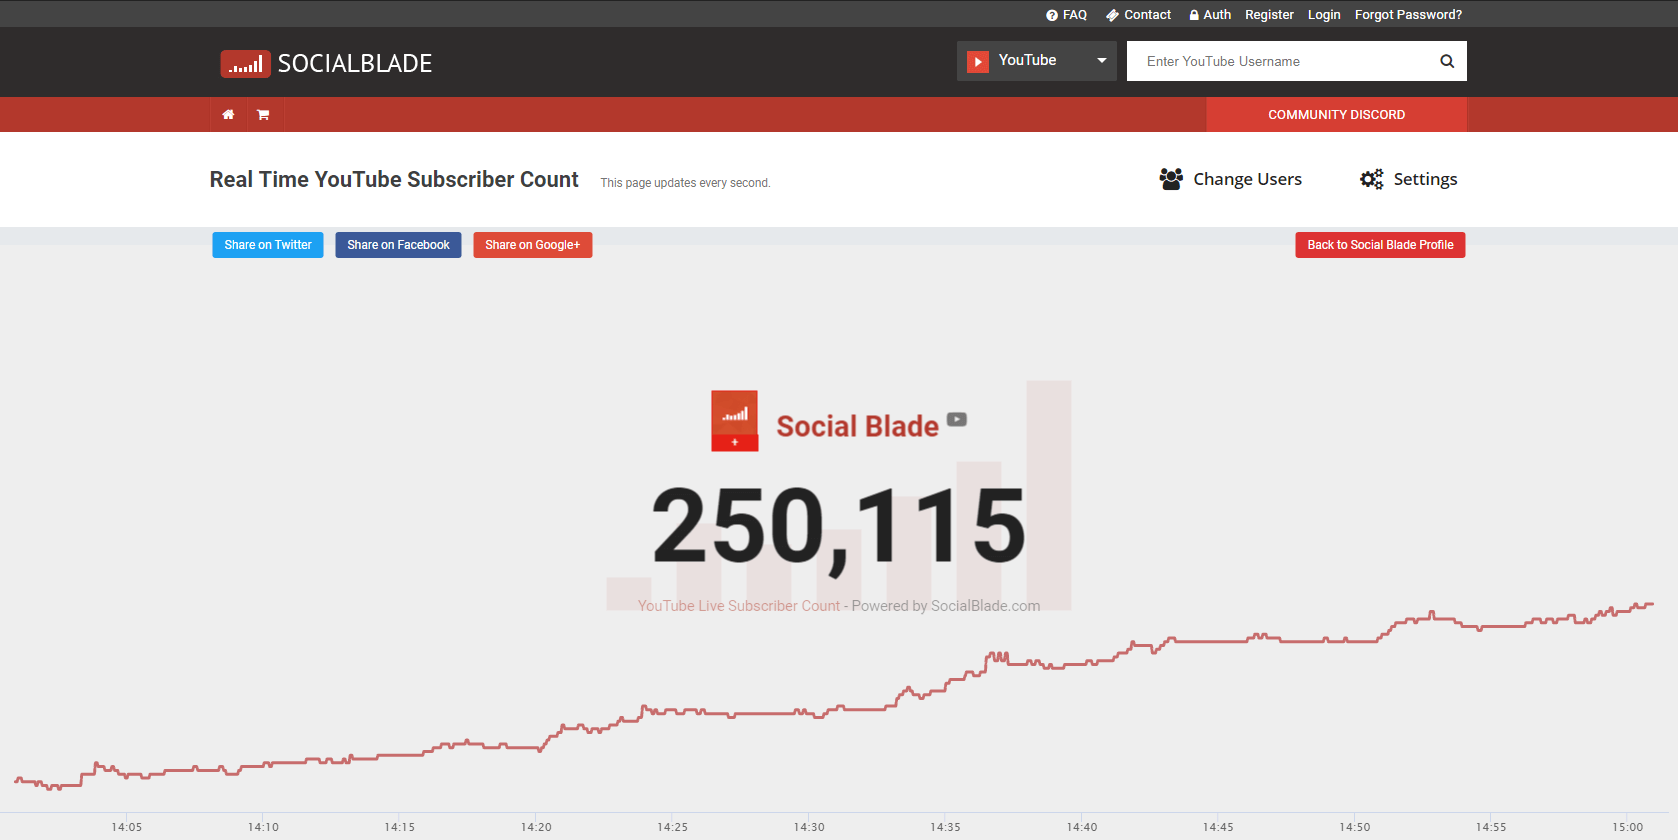 Real time YouTube subscriber count for SocialBlade’s channel